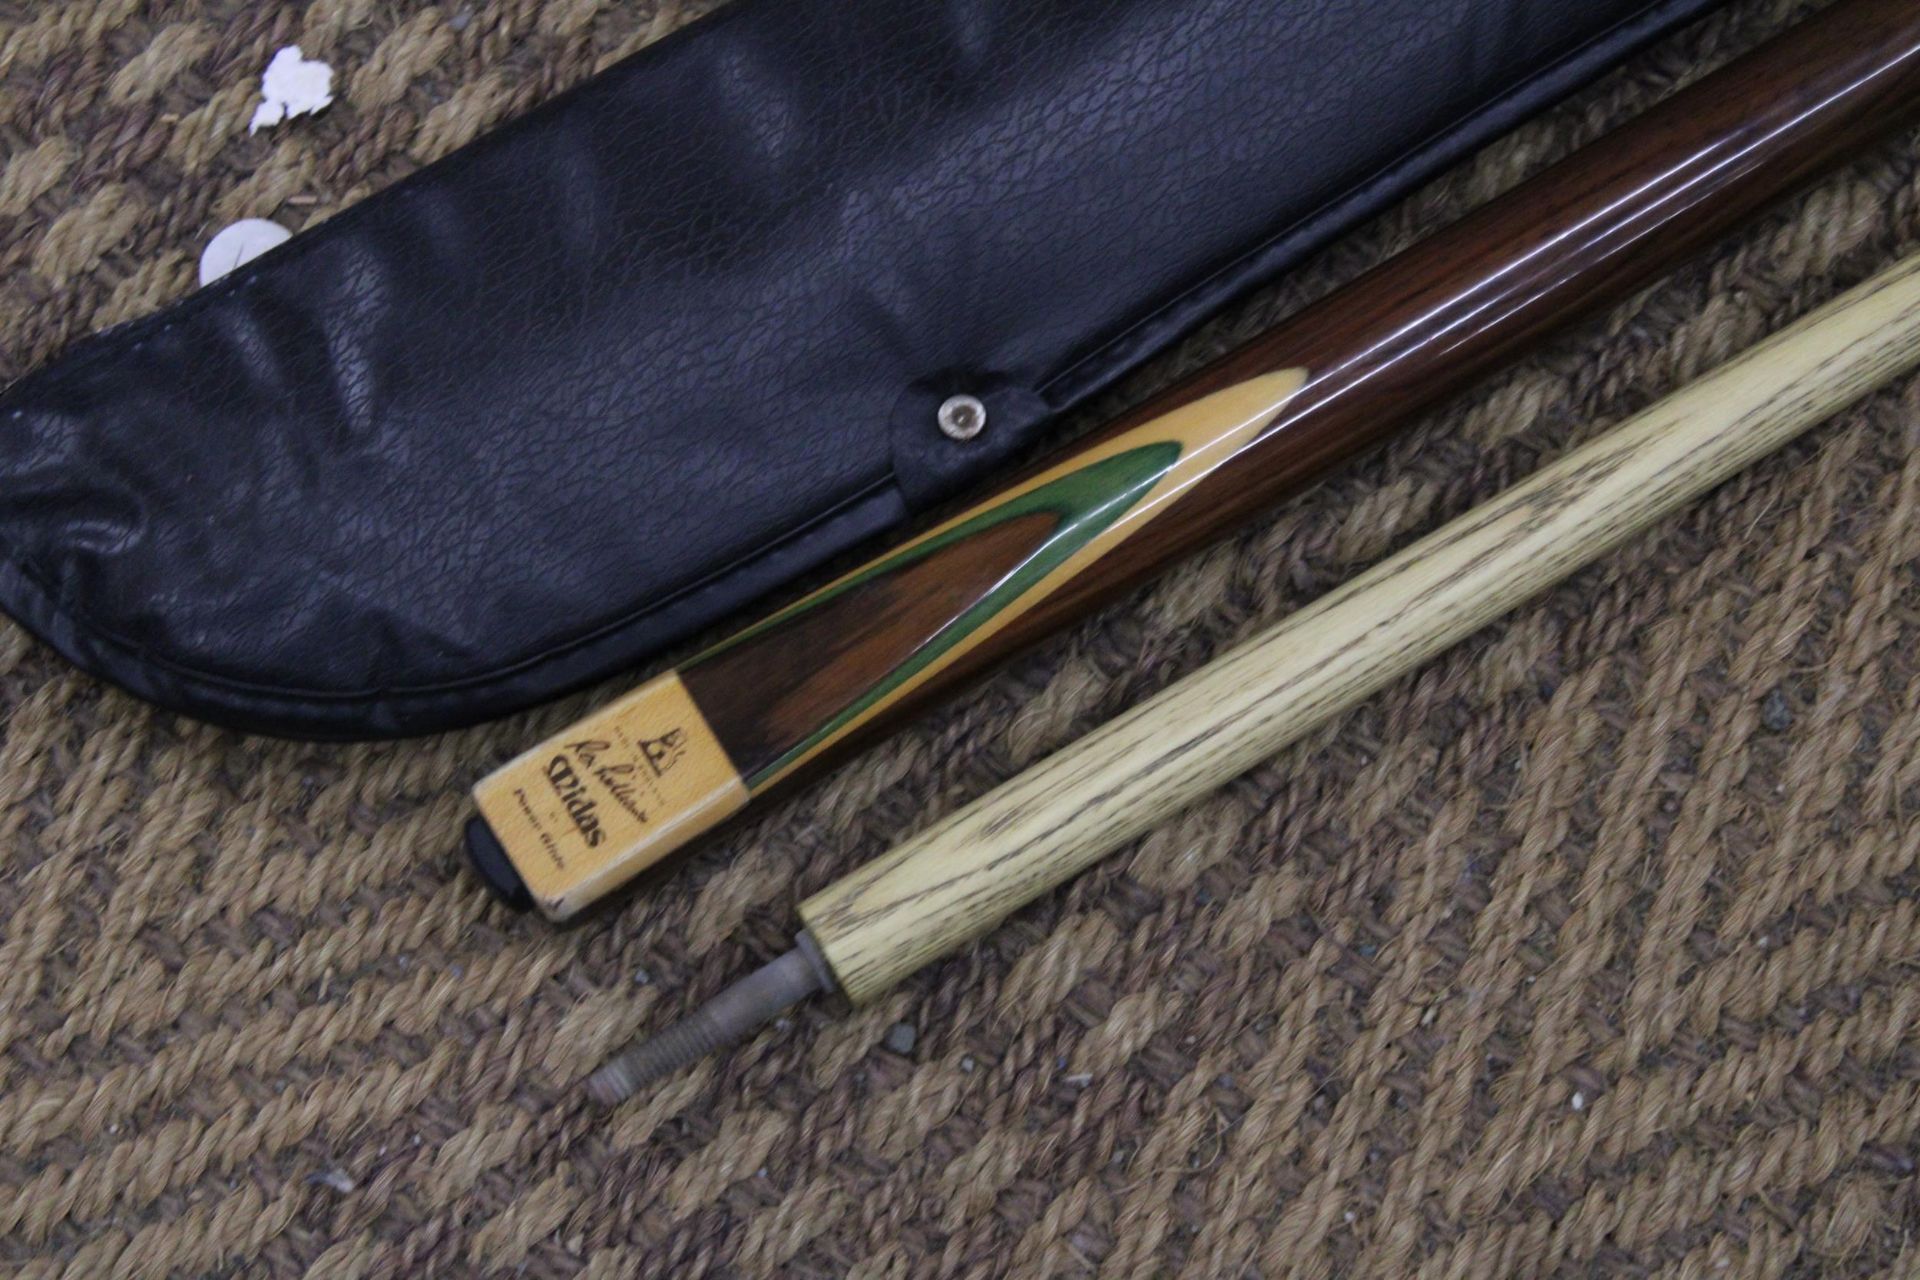 A MIDAS, REX WILLIAMS, SNOOKER CUE IN A SOFT CASE - Image 2 of 3